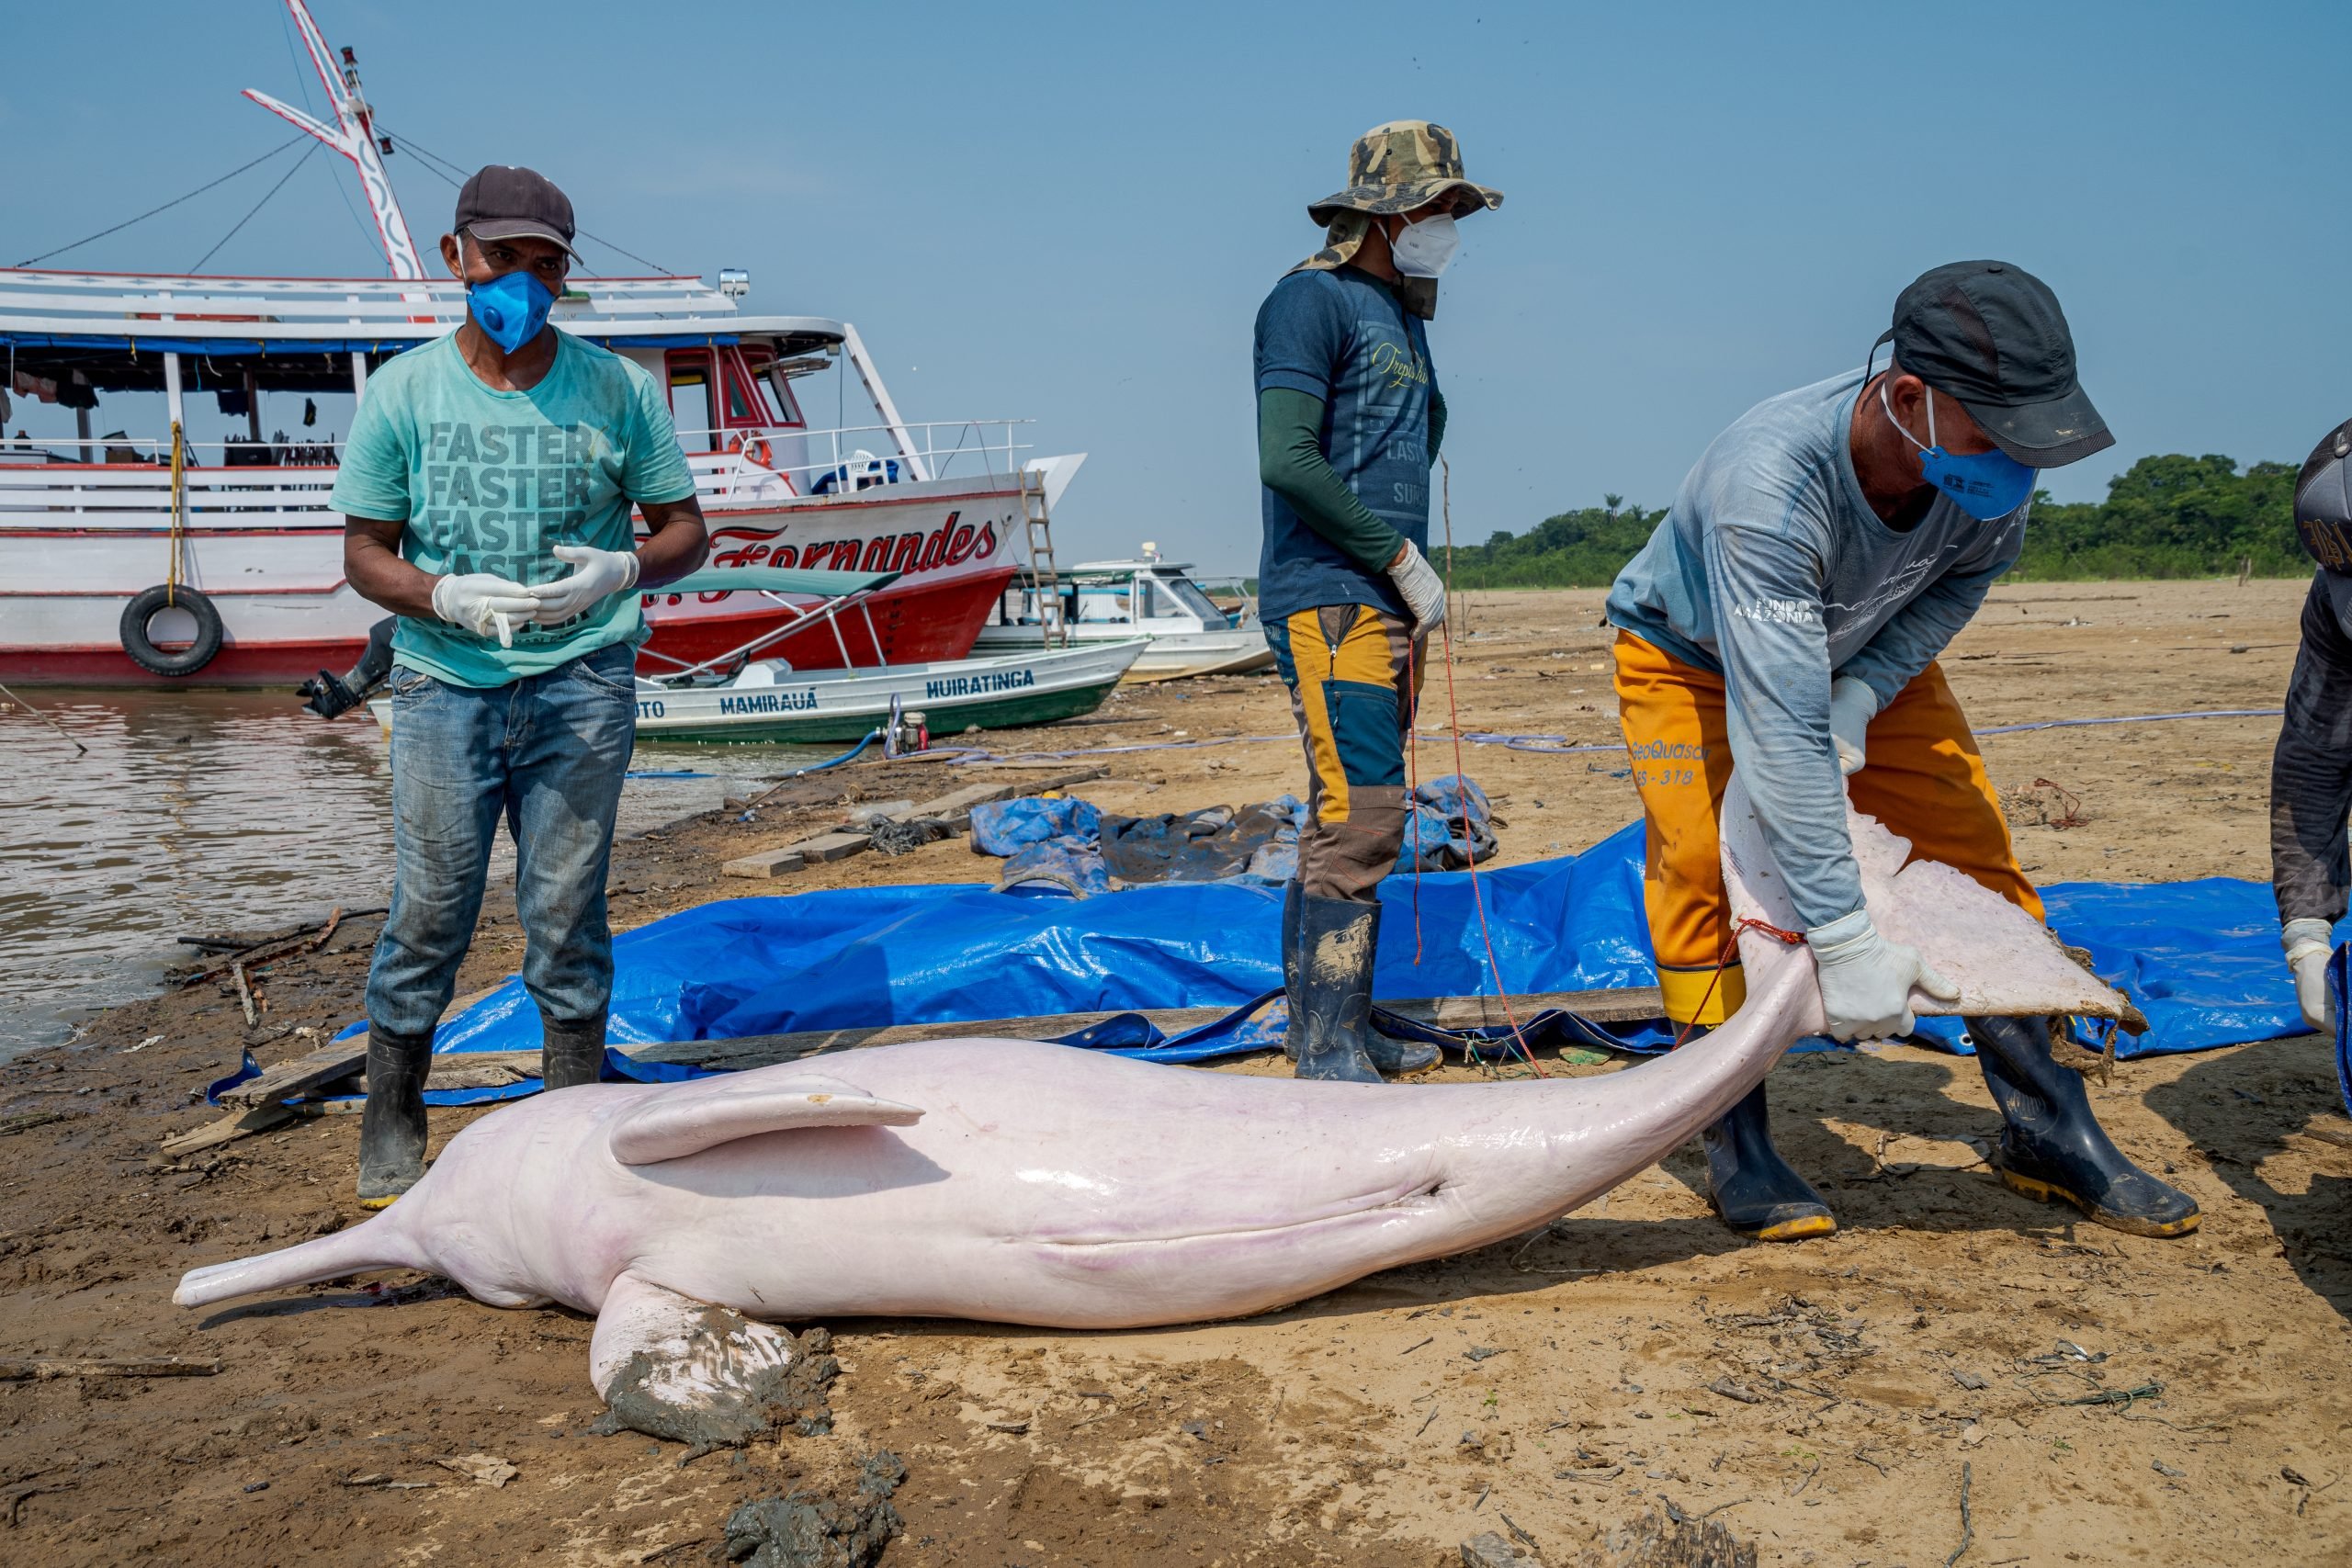 Amazon River dolphin dies after drought and extreme heat